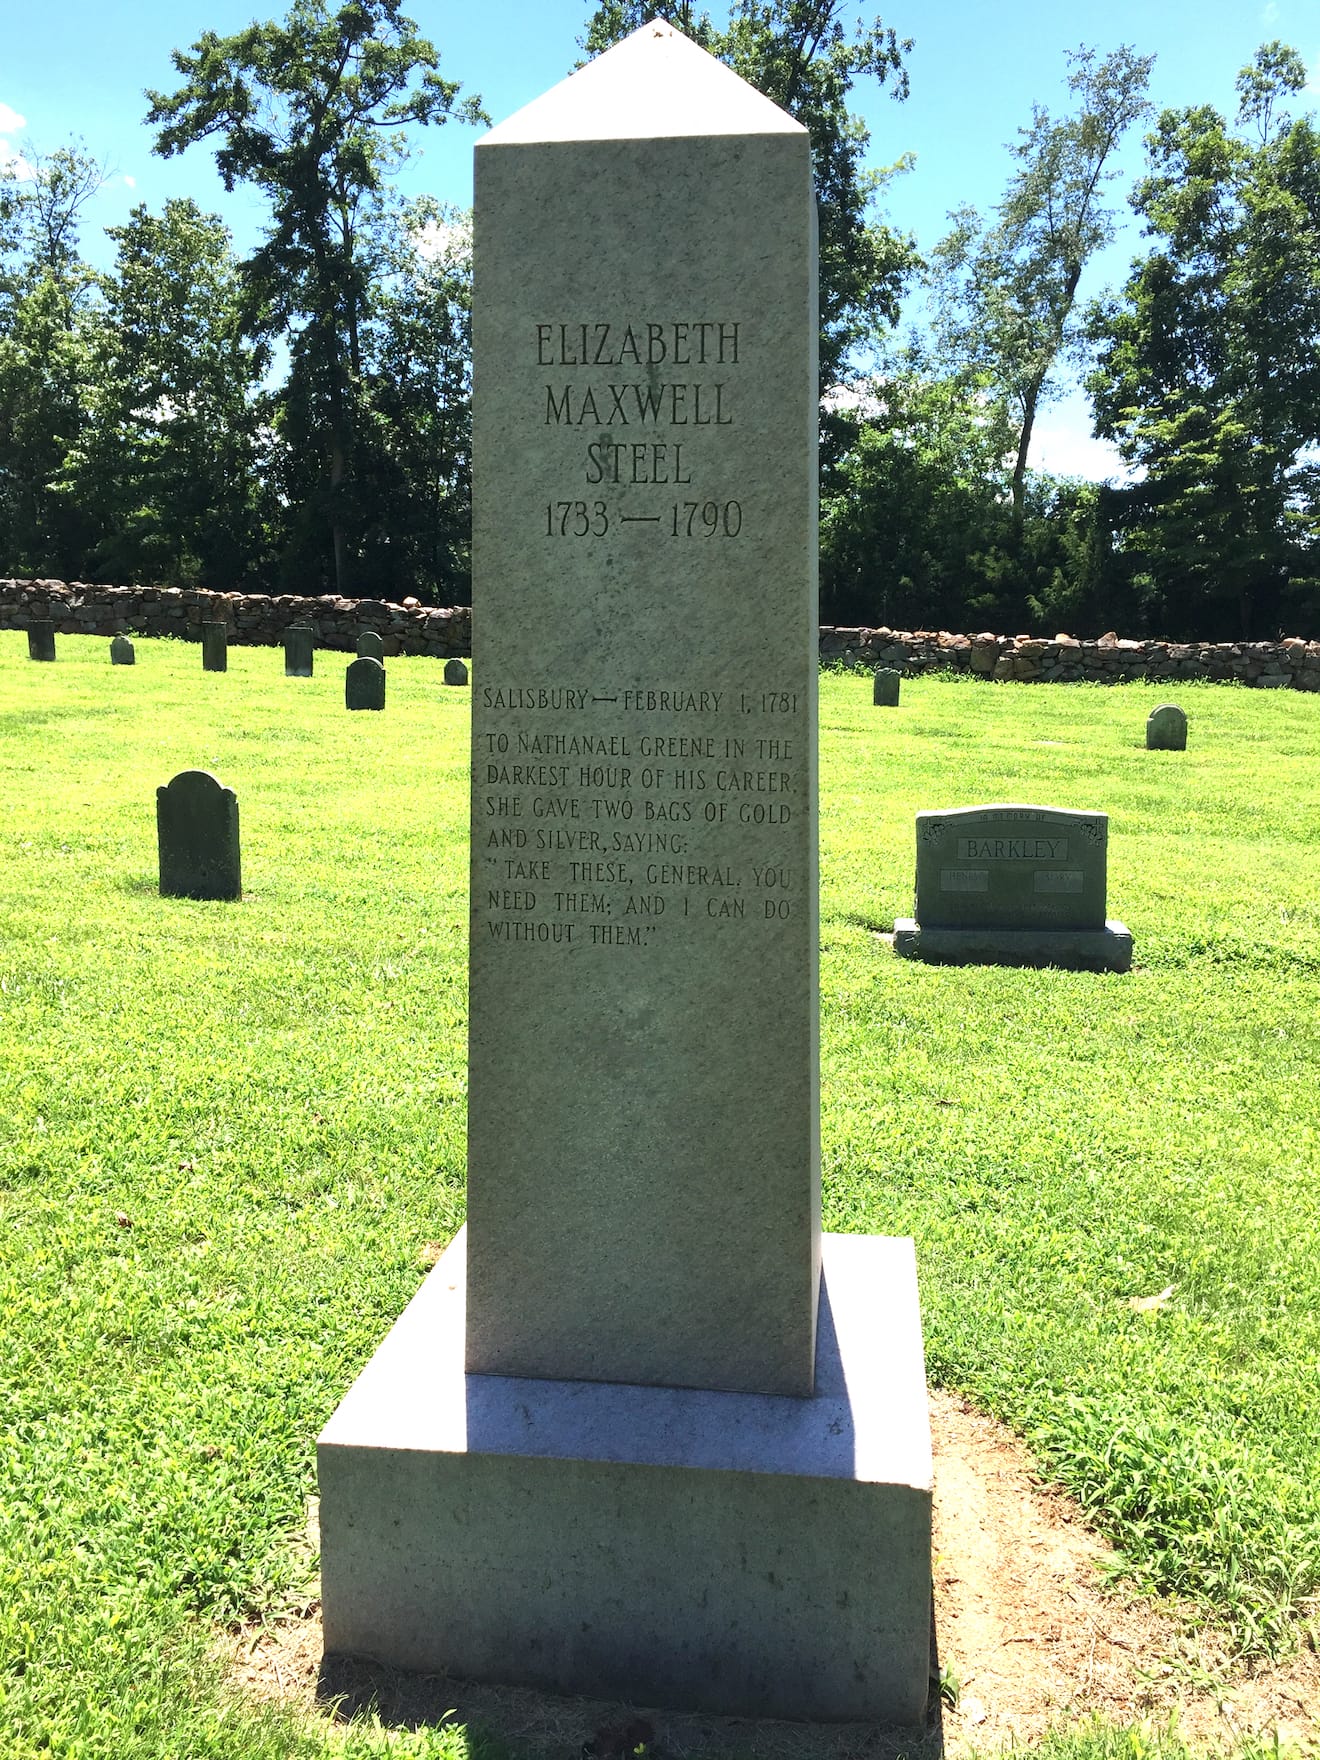 Elizabeth Maxwell Steele monument at Thyatira Cemetery (image by member Cathy Finnie)